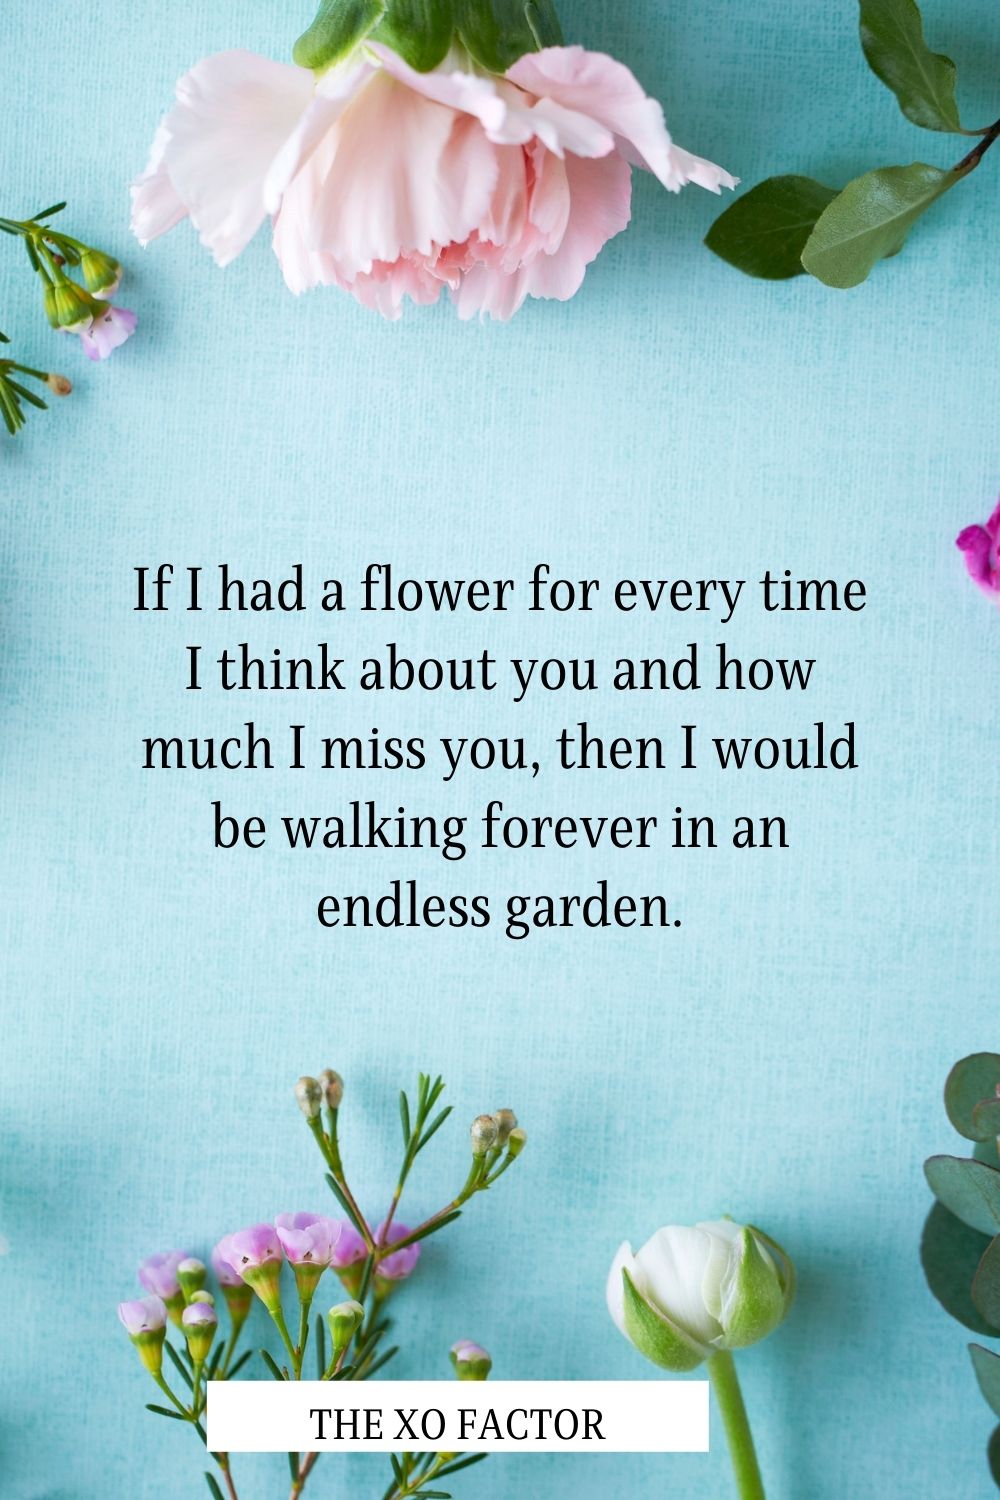 If I had a flower for every time I think about you and how much I miss you, then I would be walking forever in an endless garden.